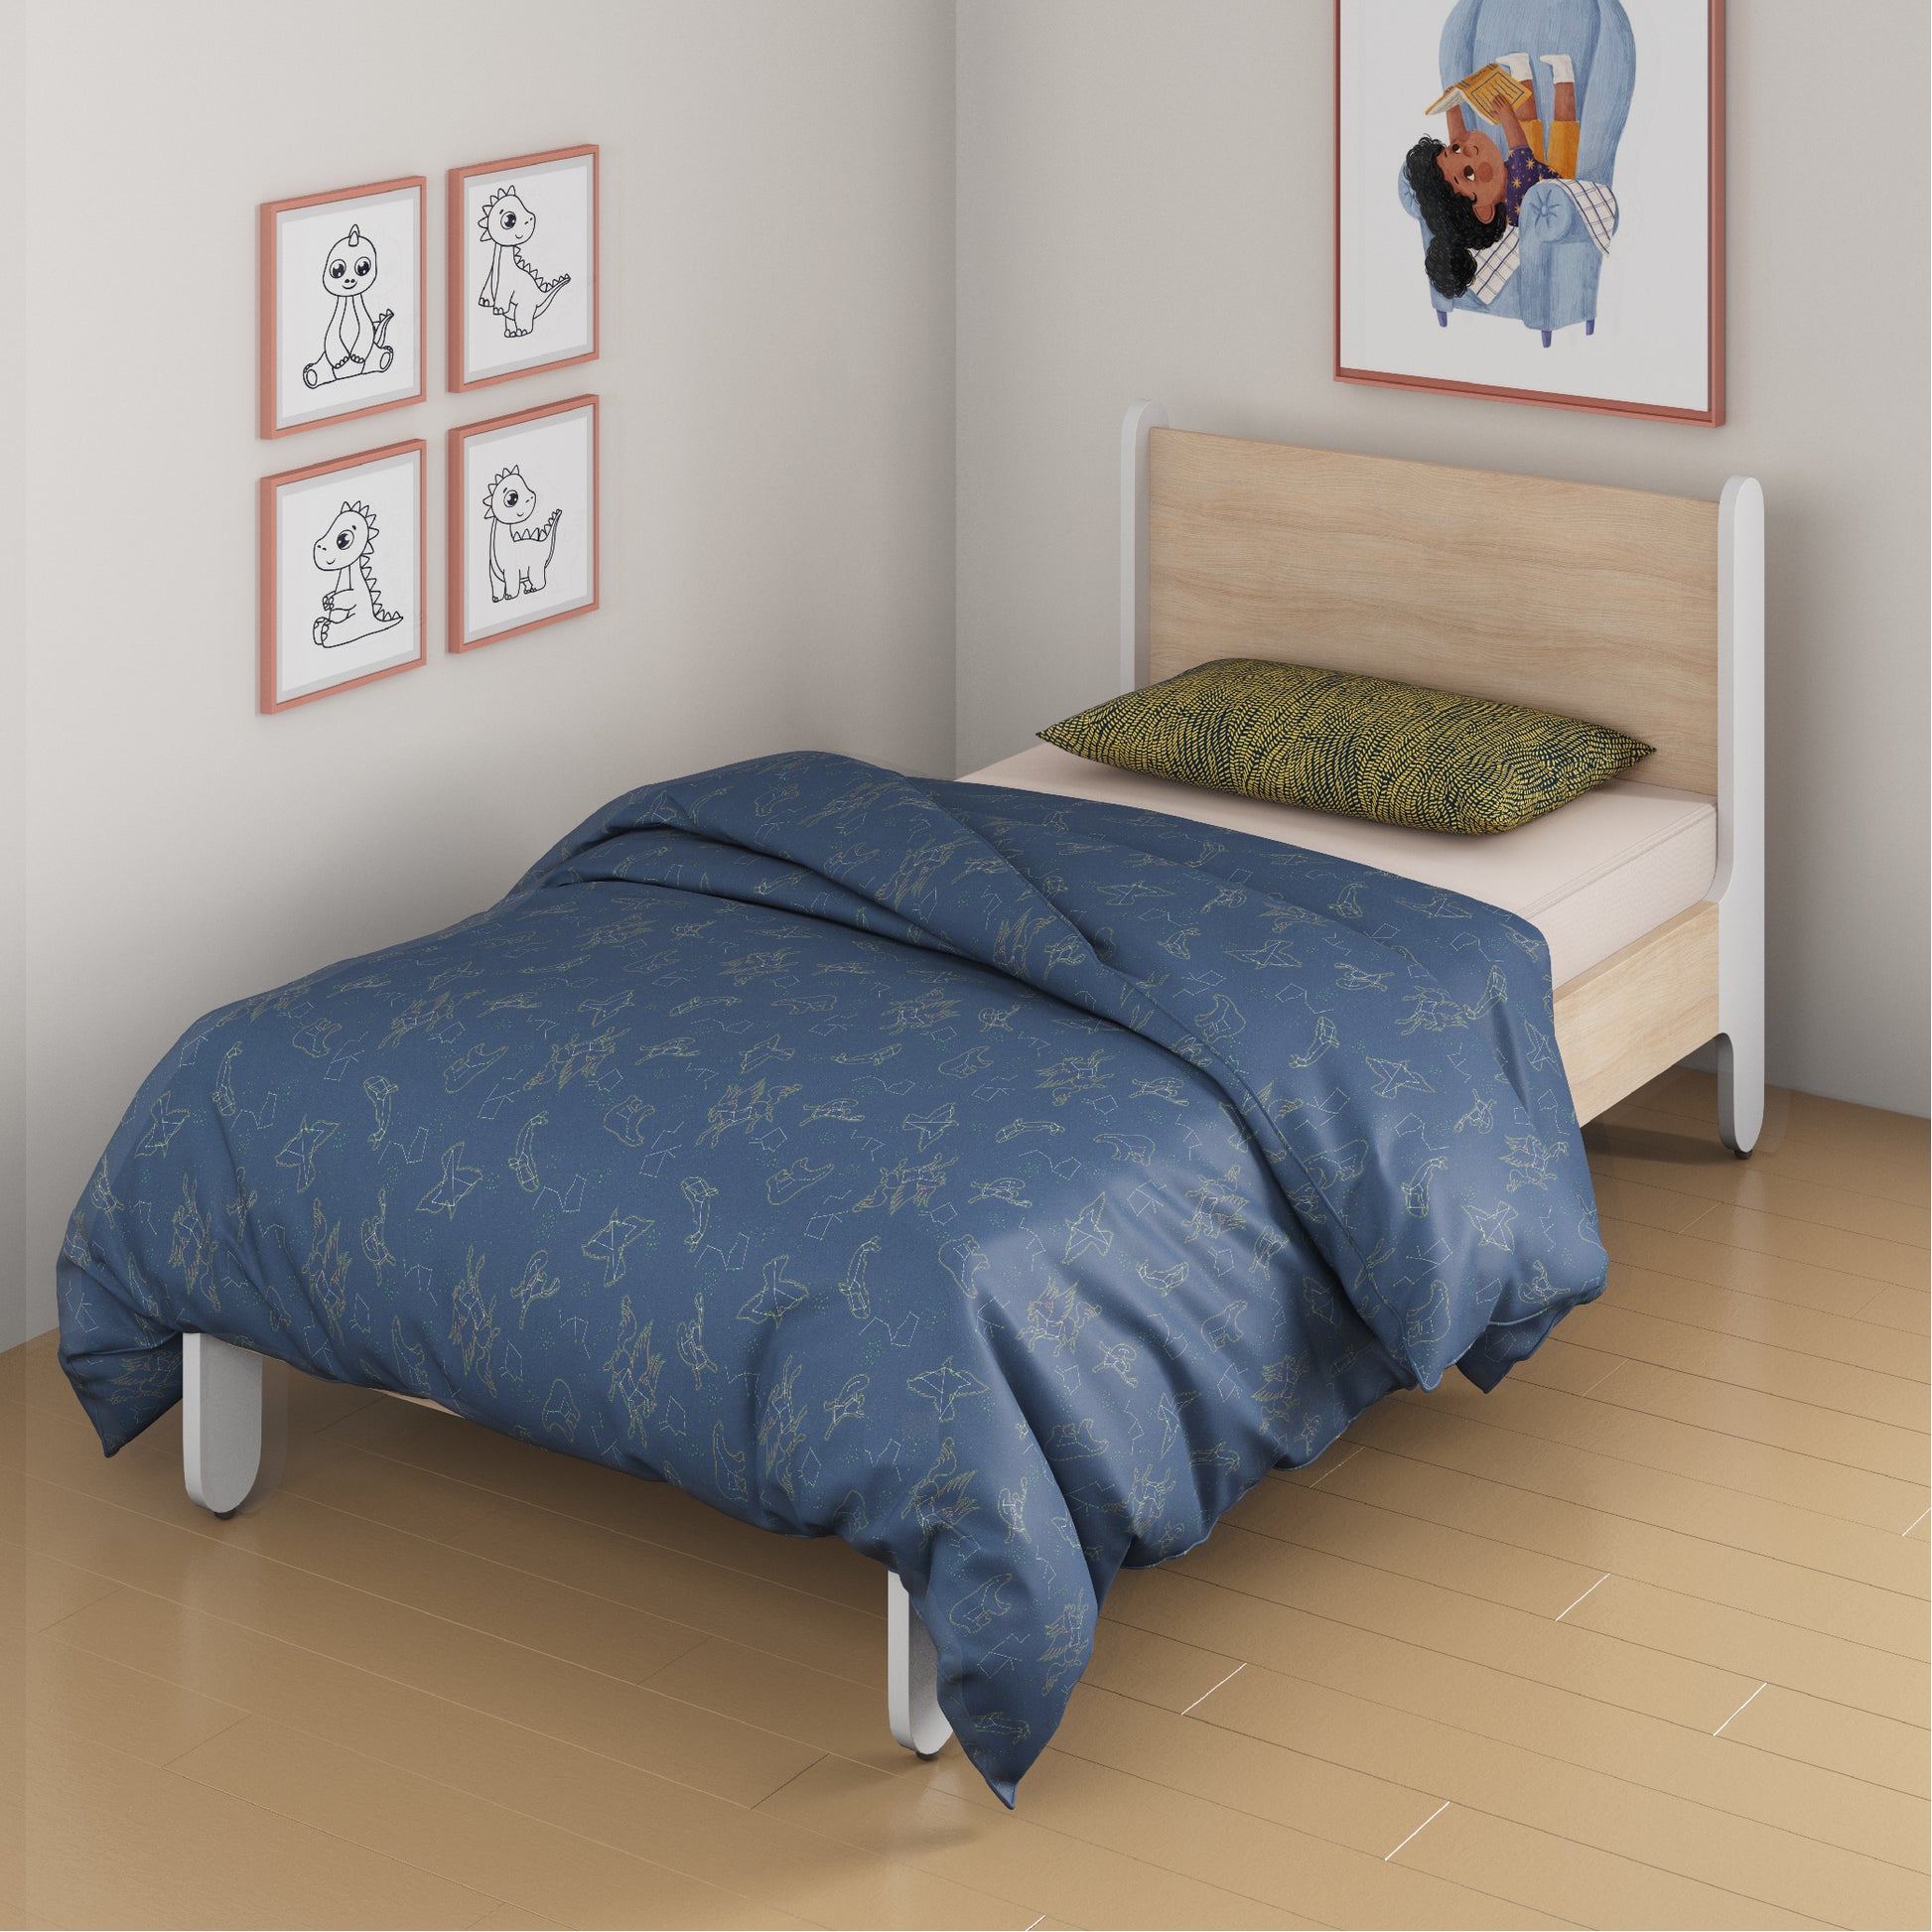 media_gallary Constellation Glow Reversible Winter Comforter Single Bed Size 1